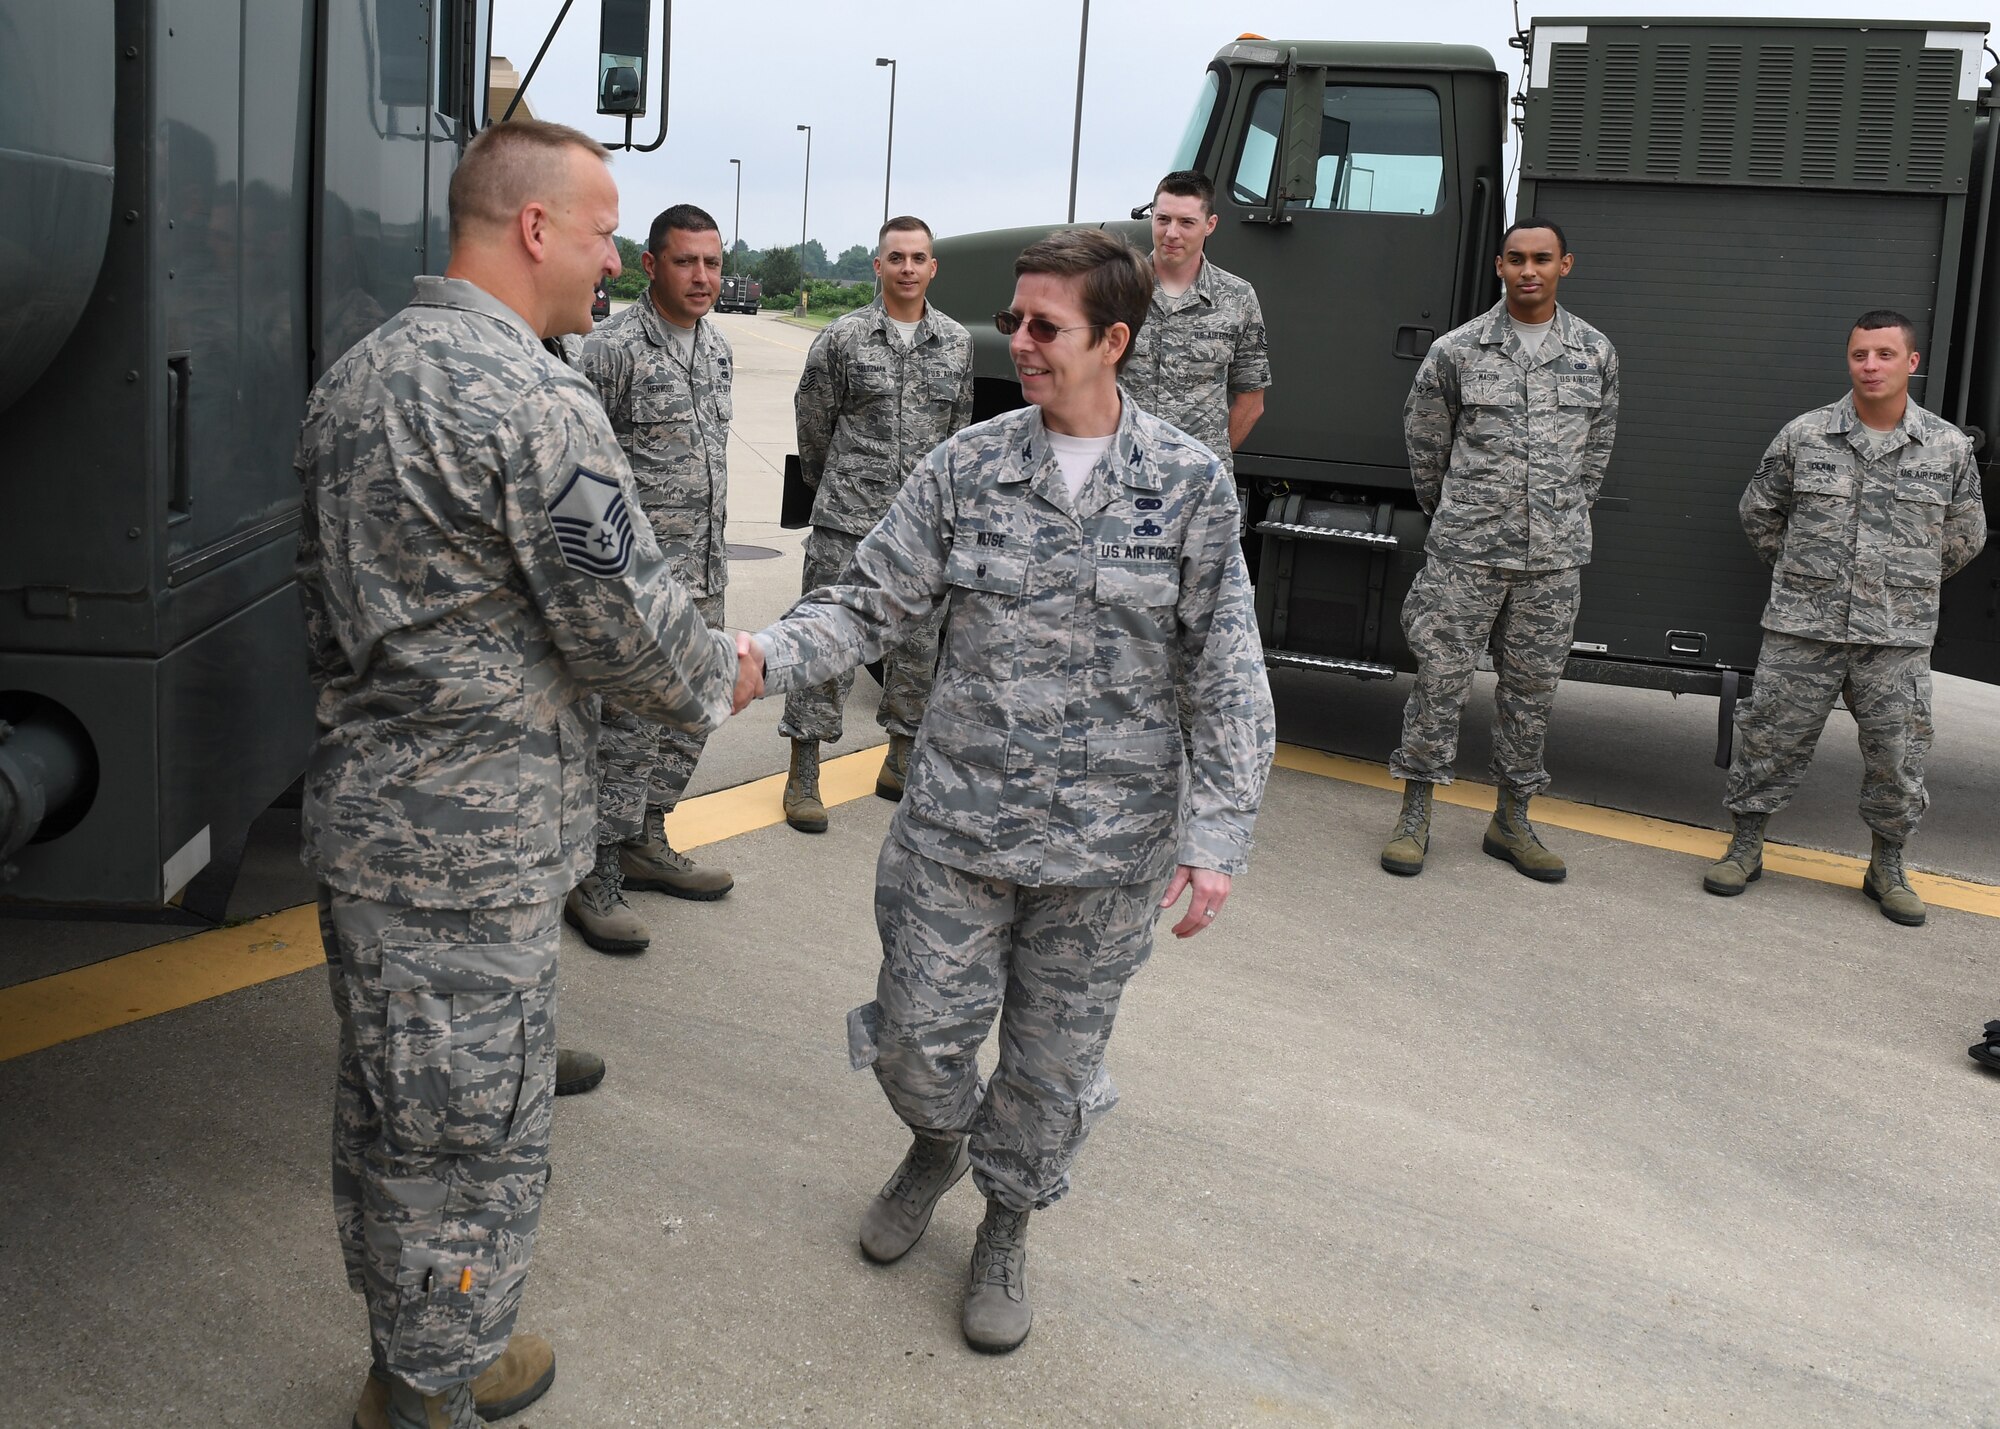 Col. Gretchen M. Wiltse greets members of the 911th Fuels Management Flight on June 1, 2018, at Pittsburgh International Airport Air Reserve Station, Pennsylvania. The flight won the Golden Derrick award for Best Fuels Management Flight in the Air Force Reserve Command for 2017. Wiltse is the chief of the AFRC Logistics Readiness Division. (U.S. Air Force Photo by Staff Sgt. Zachary Vucic)